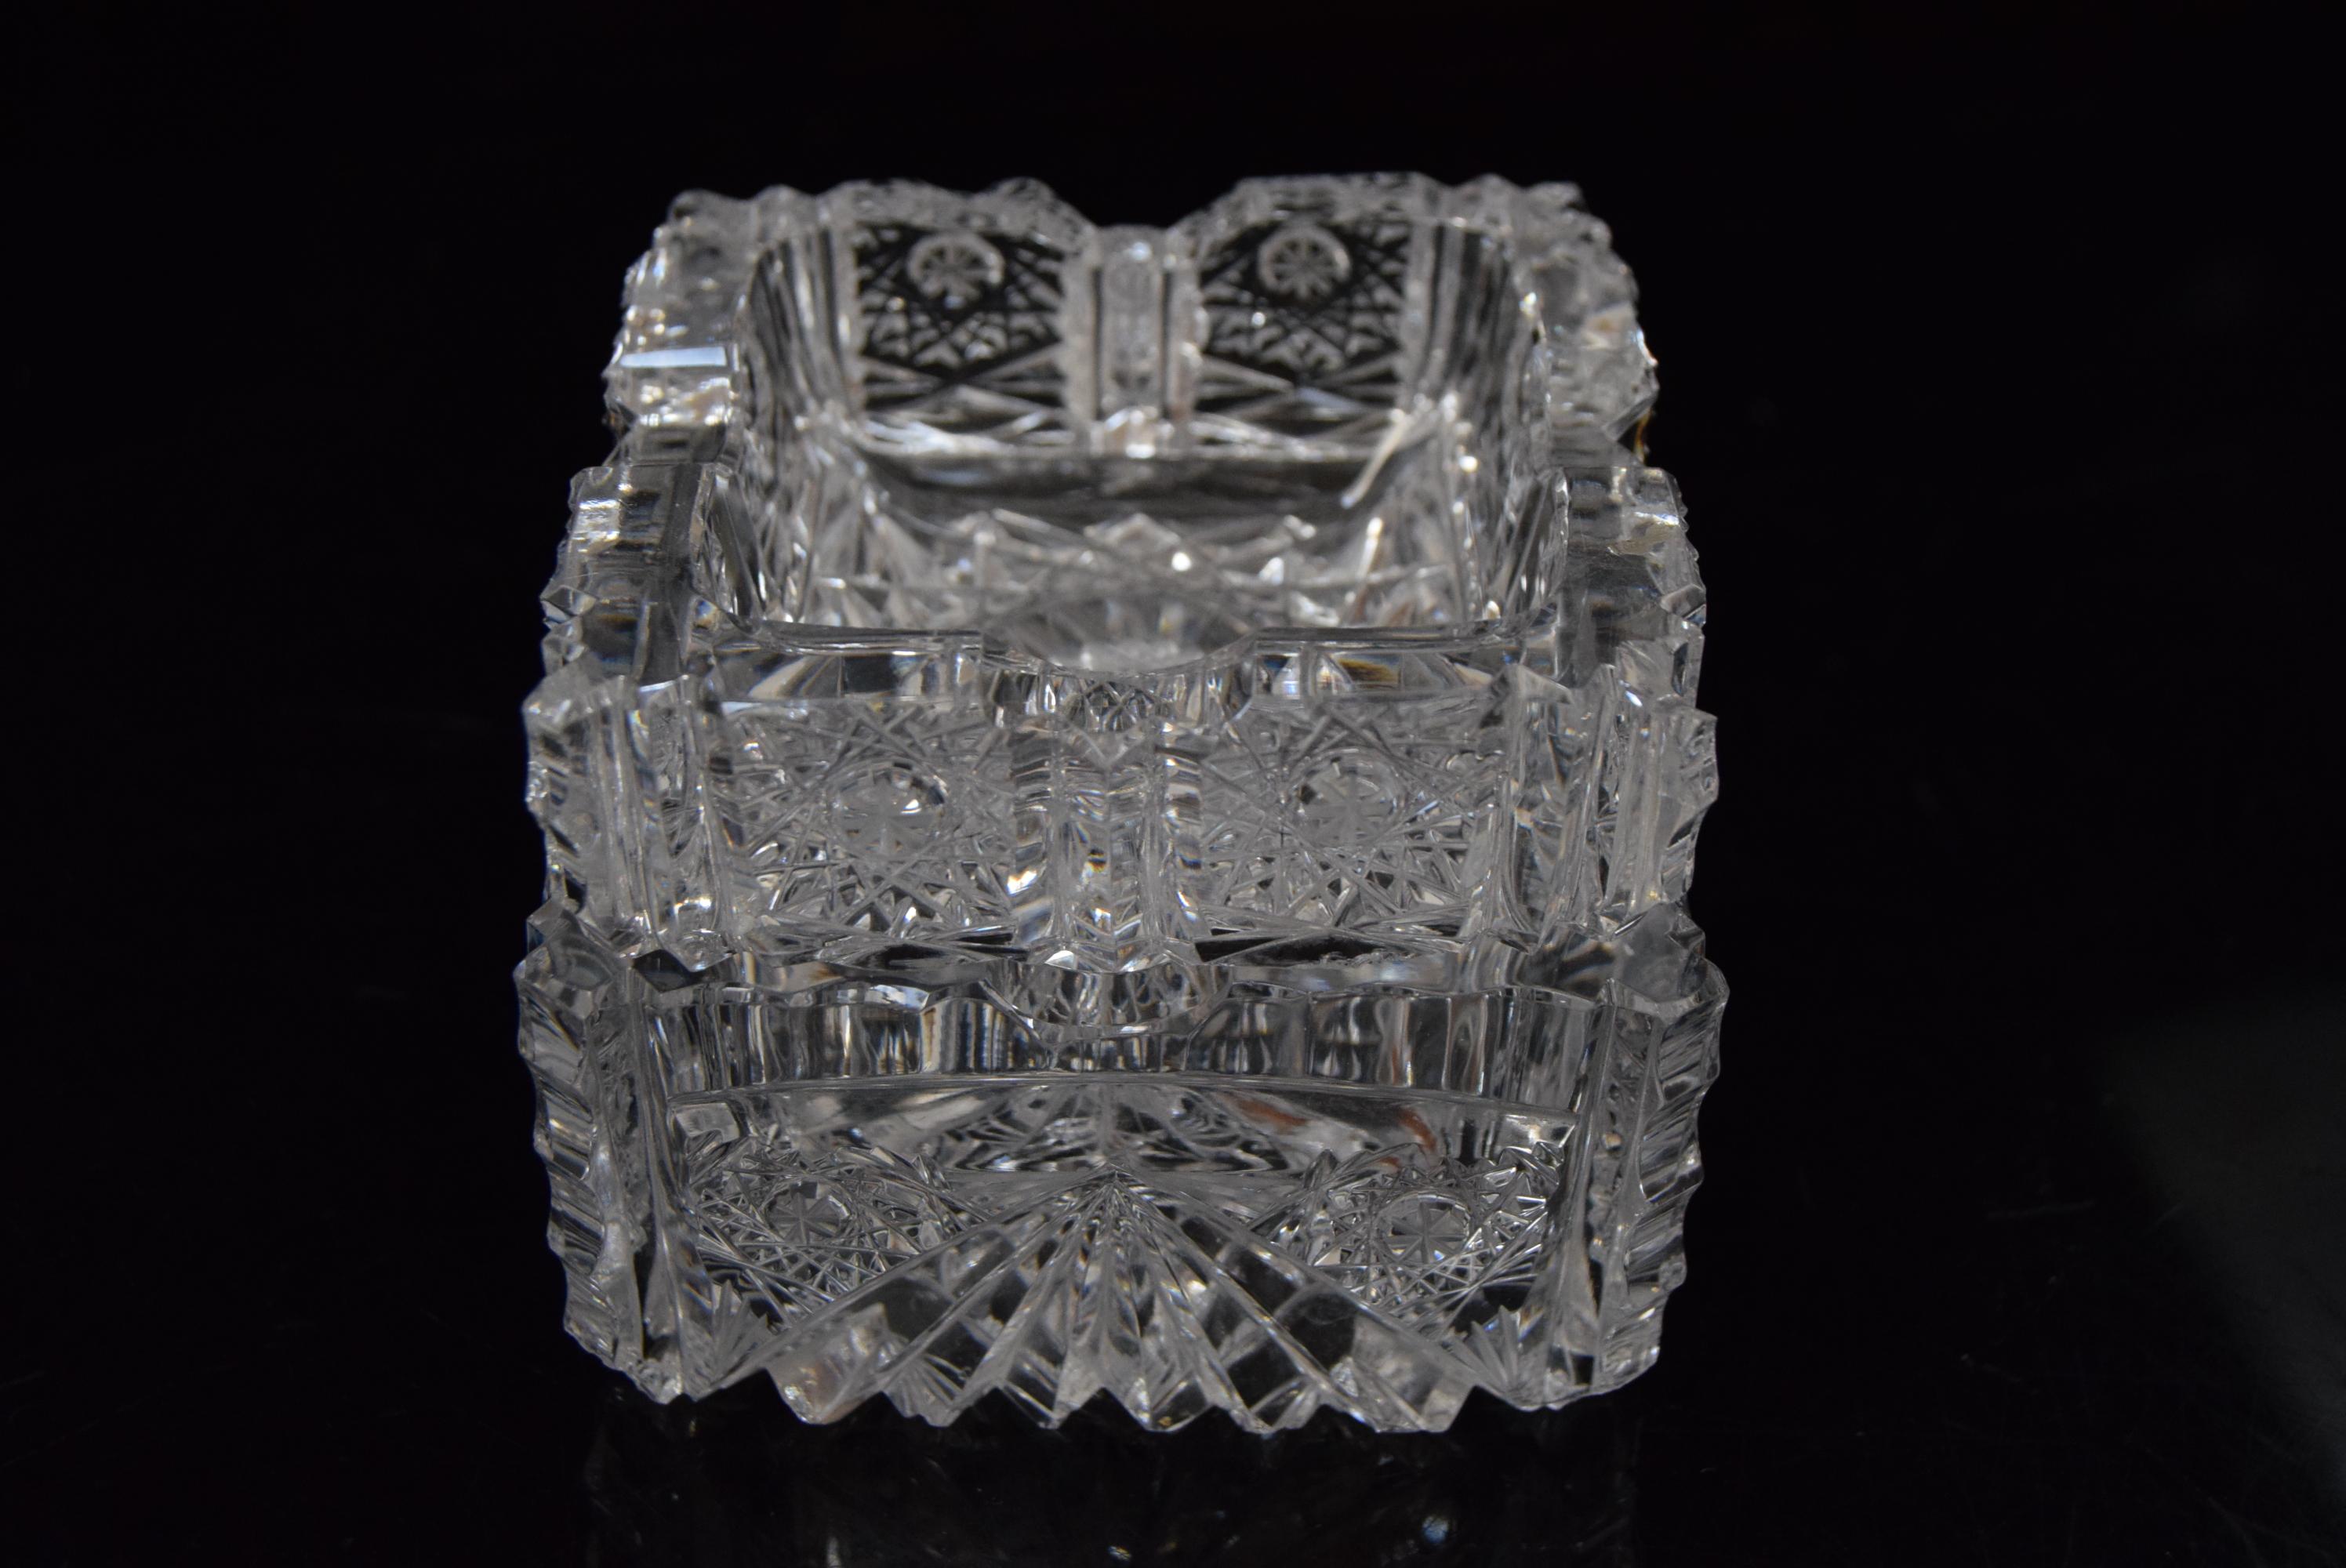 Made in Czechoslovakia
Made of Crystal glass
Larger Ashtray, Size: Height:4,5cm, width and depth 8,5cm
Smaller Ashtray: Height.3cm, width and depth:8cm
Good original condition.